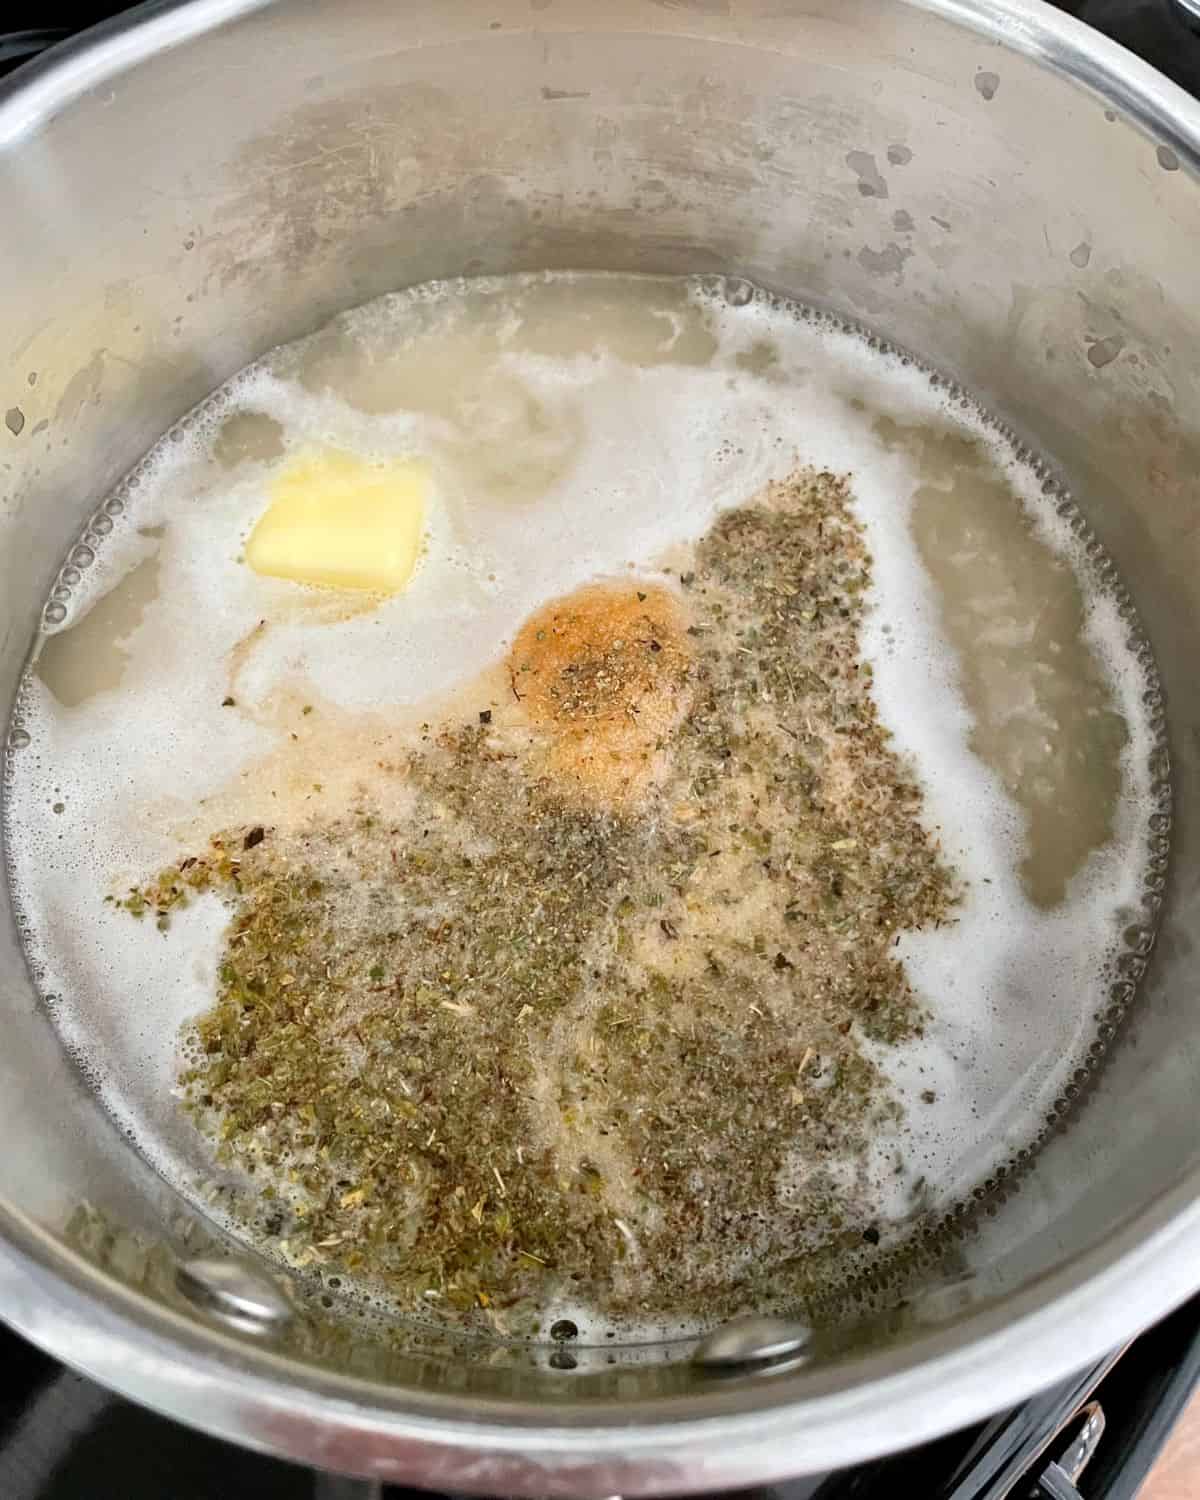 Chicken stock, rice, seasonings, and butter in a saucepan.